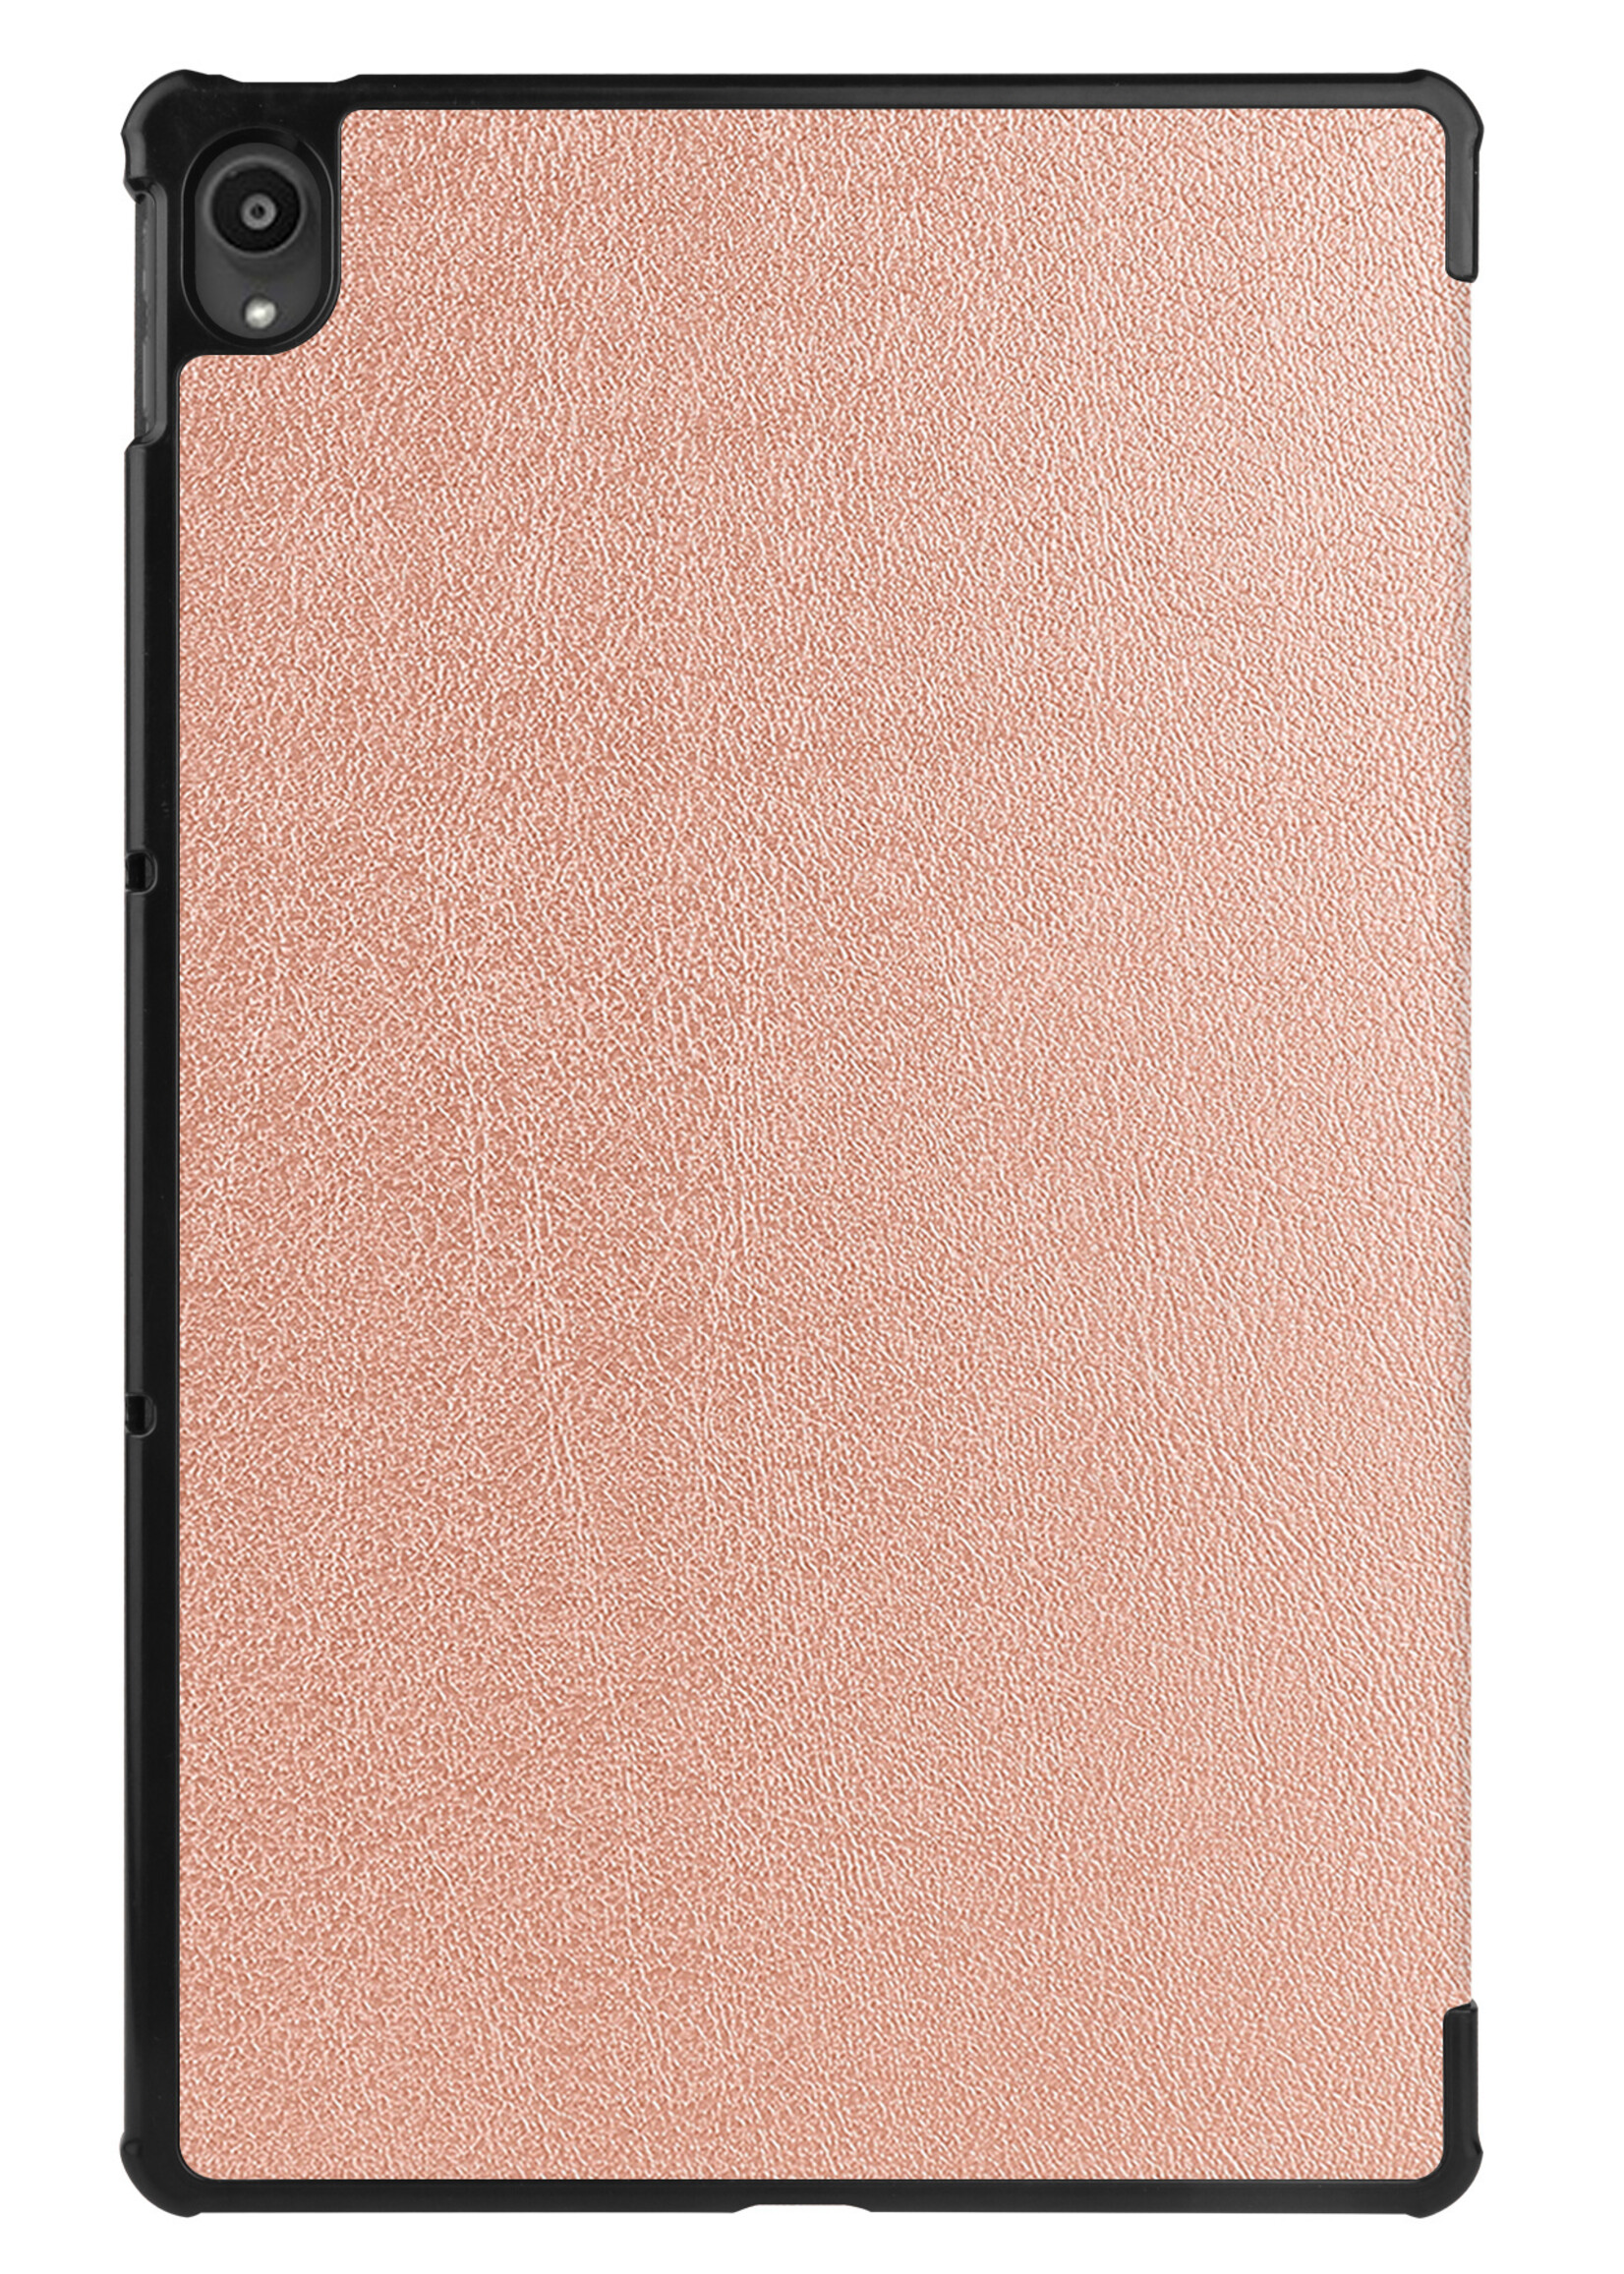 BTH Lenovo Tab P11 Hoes Luxe Book Case Hoesje - Lenovo Tab P11 Hoes Cover (11 inch) - Rose Goud